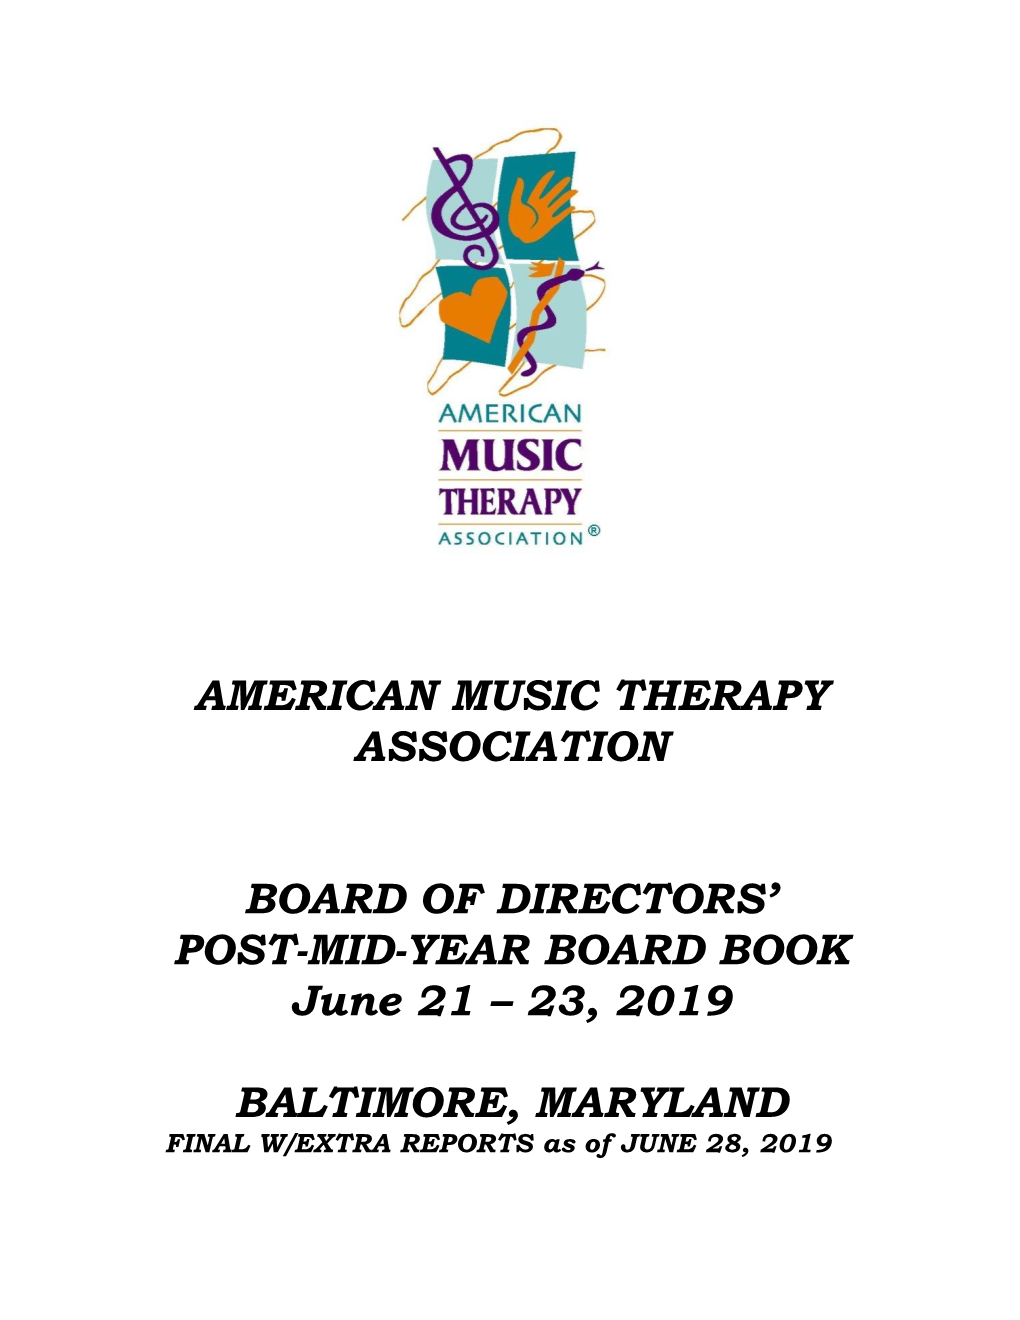 AMERICAN MUSIC THERAPY ASSOCIATION BOARD of DIRECTORS’ MID-YEAR MEETING-JUNE 21-23, 2019 PRESIDENT’S REPORT Amber Weldon-Stephens, Eds, LPMT, MT-BC